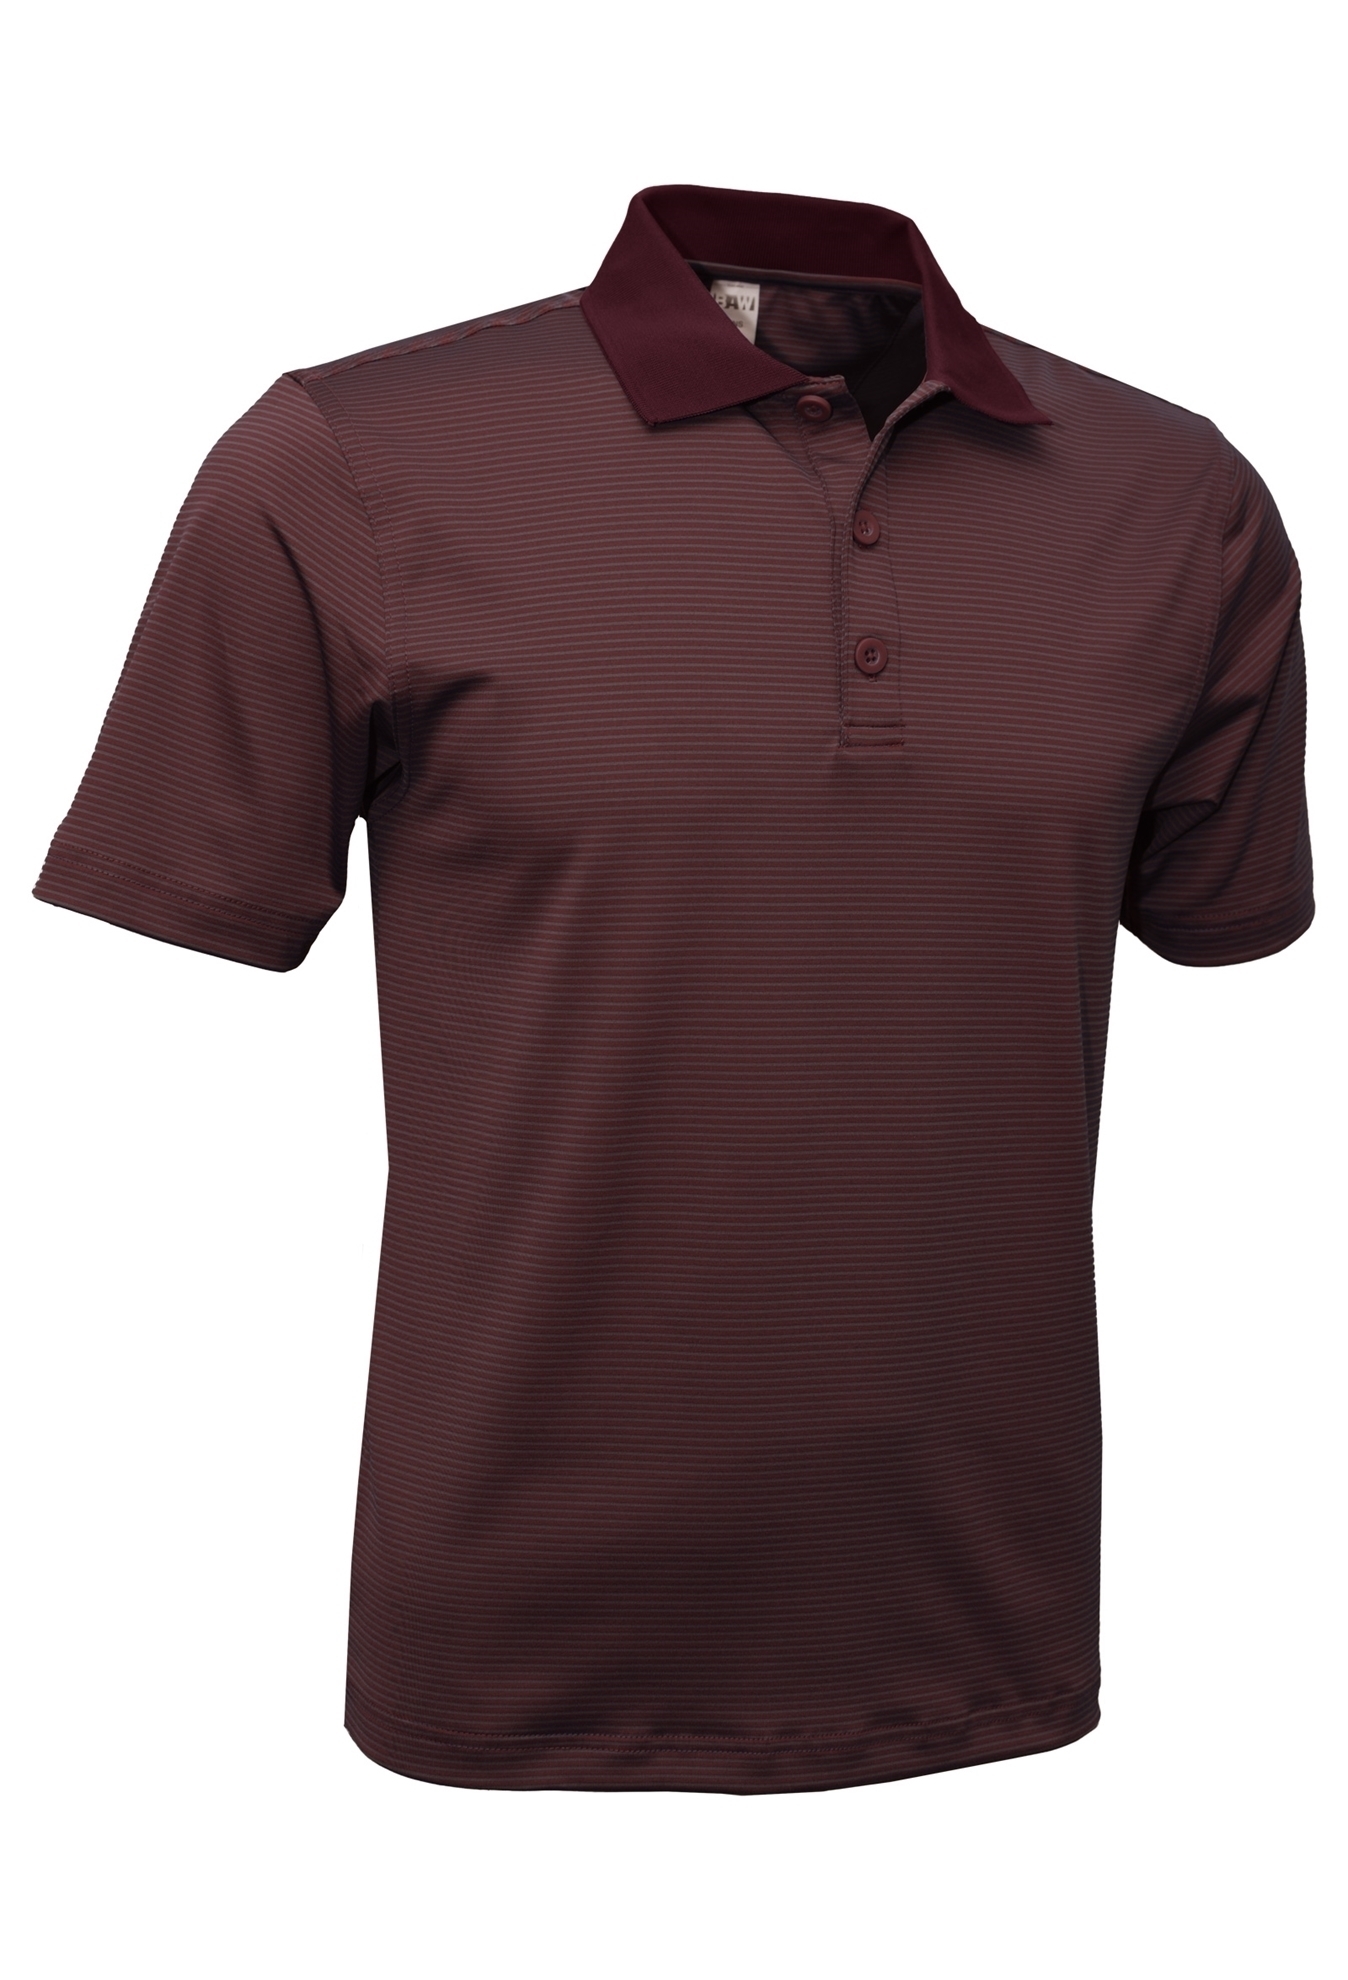 click to view Maroon/Charcoal